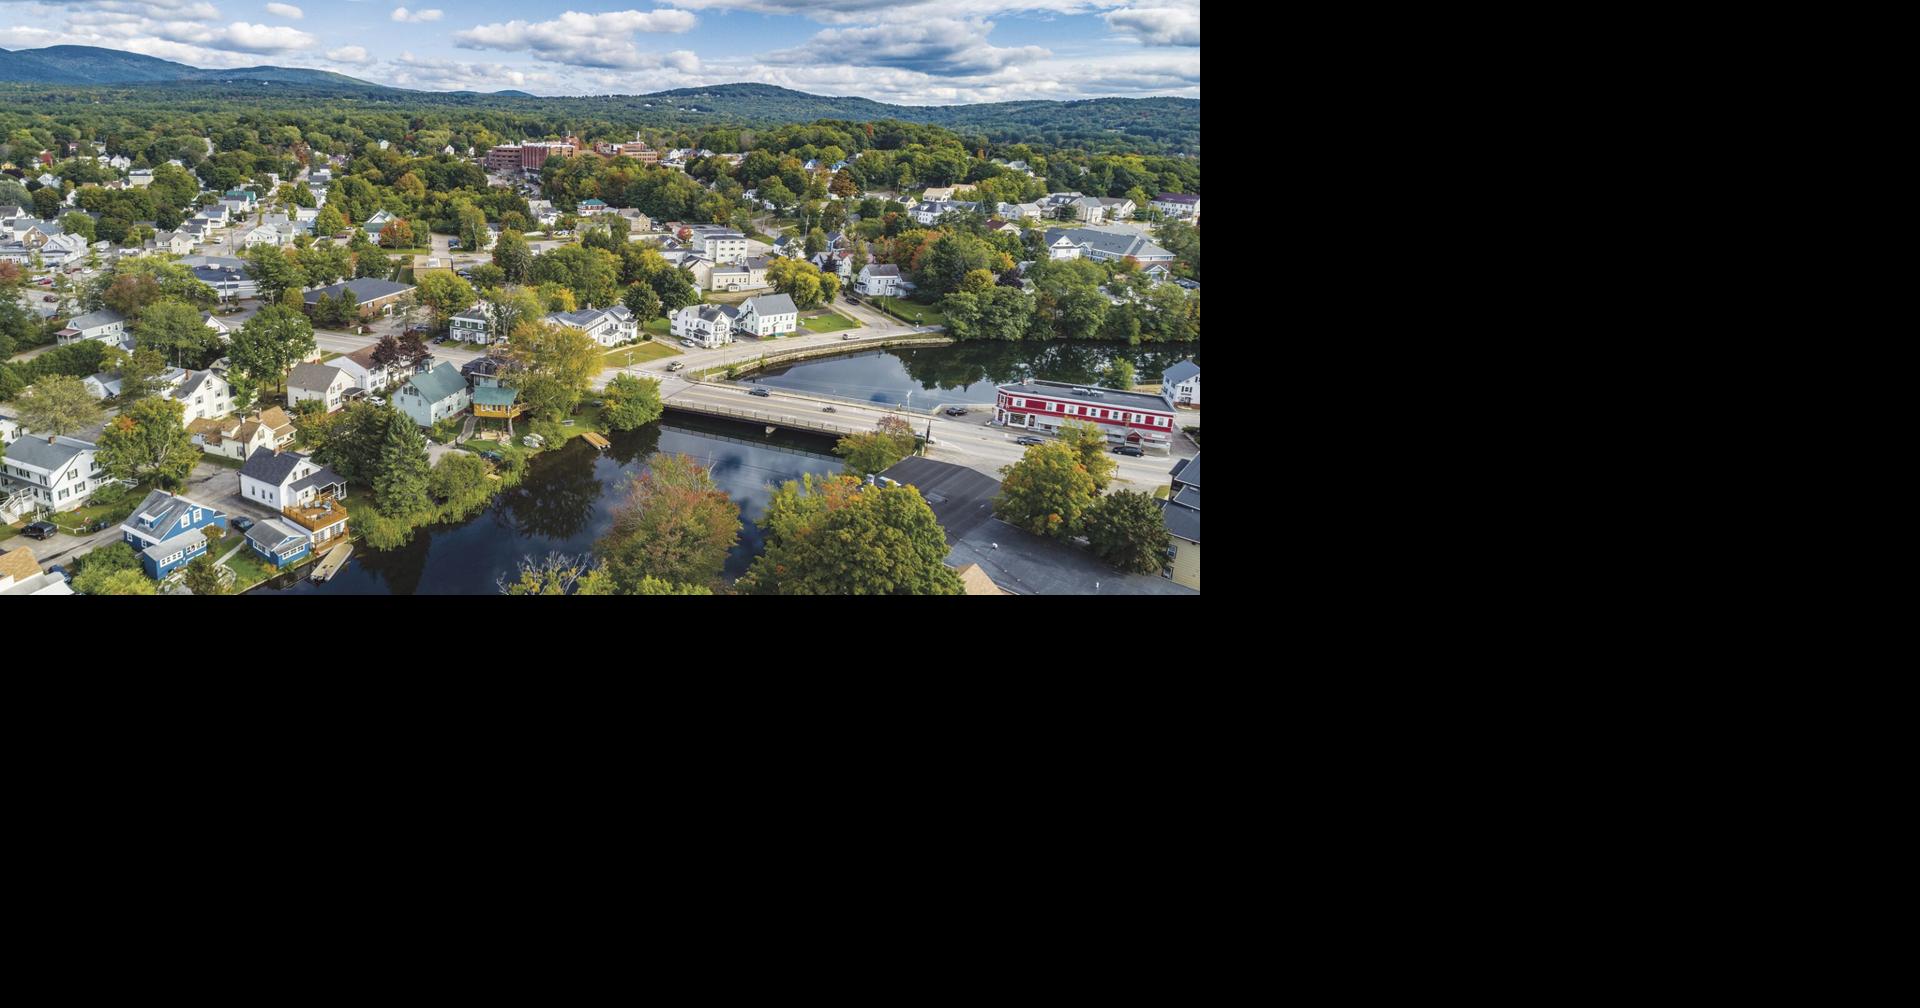 New Hampshire housing trends and forecast show rising prices, limited inventory, legislative efforts, and robust market activity